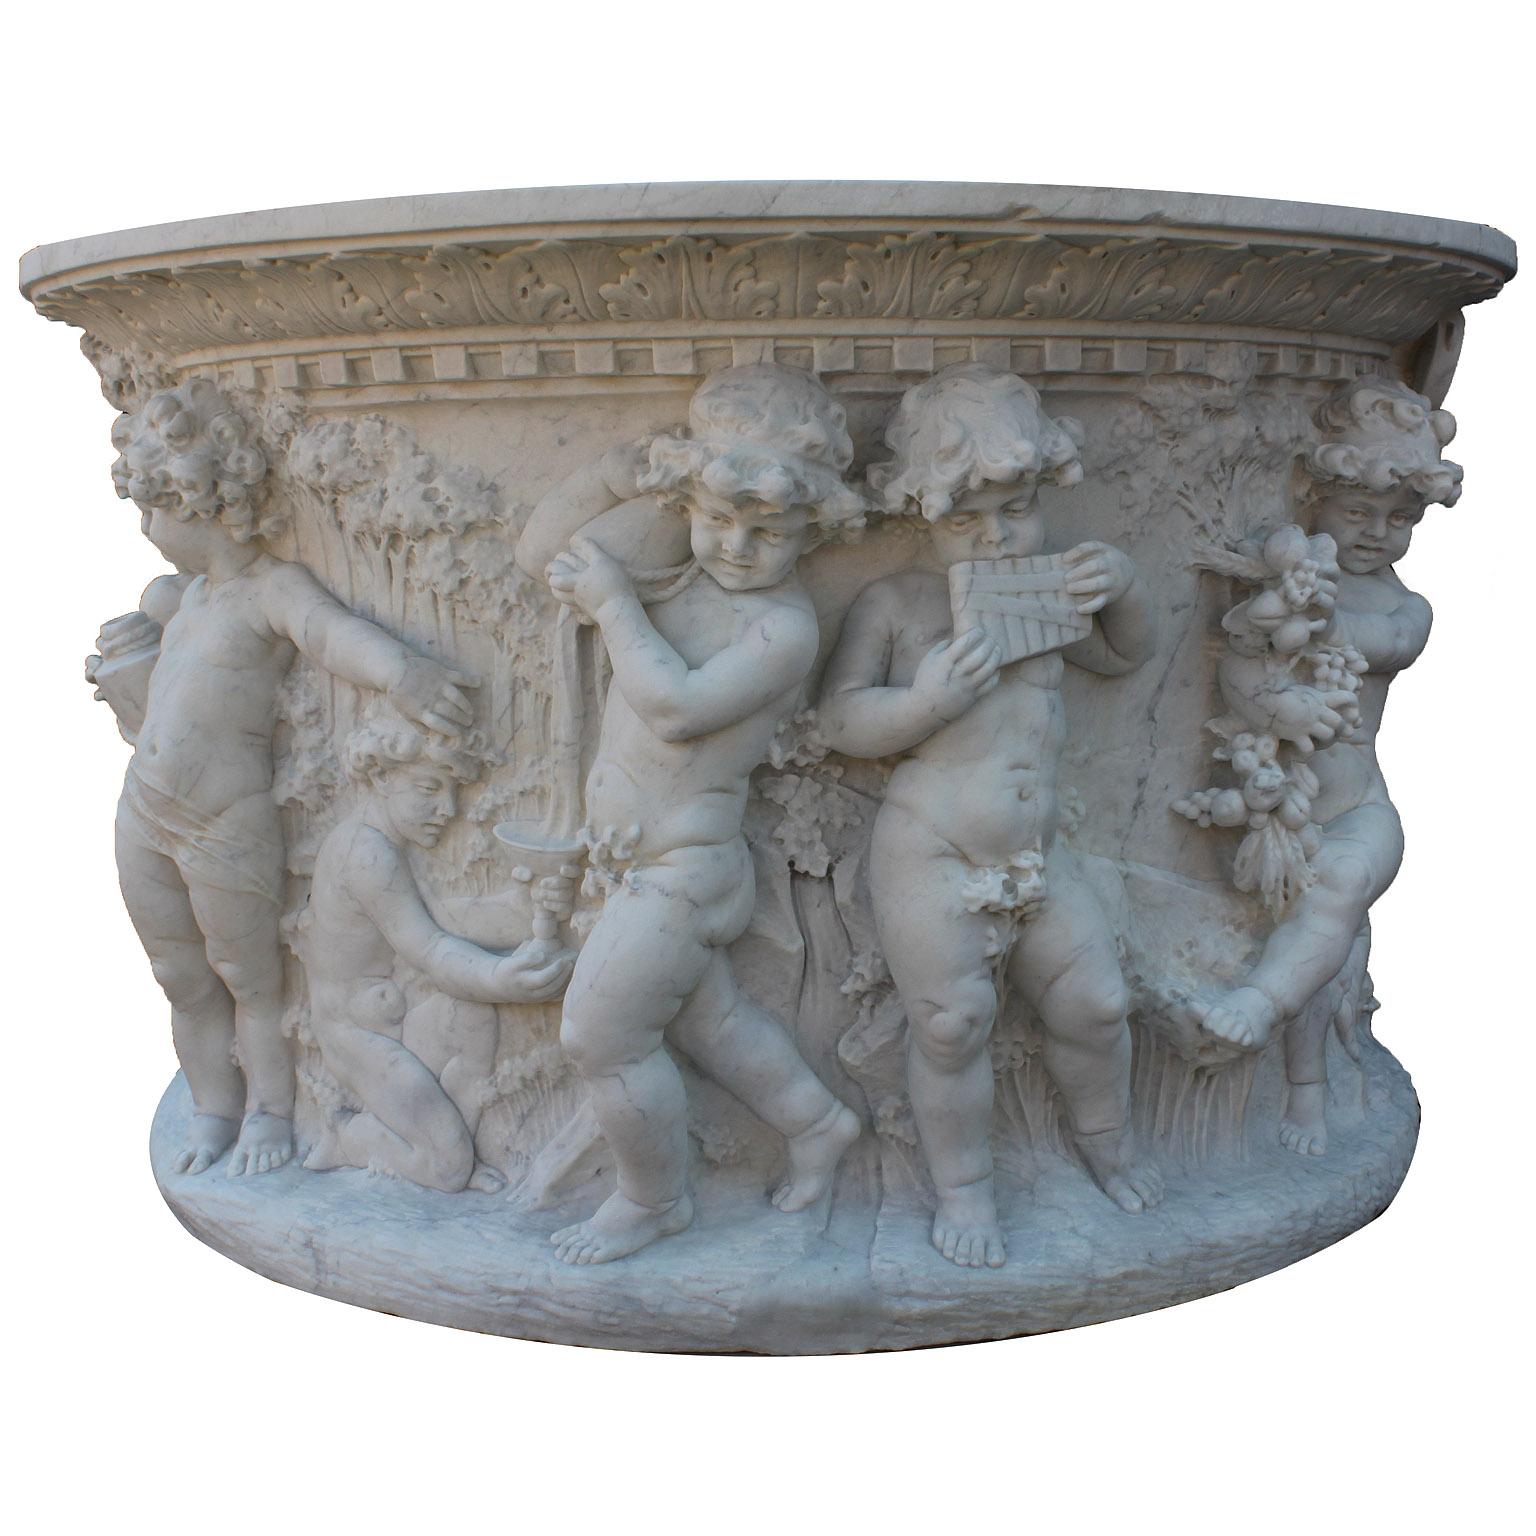 A very fine and exceptionally carved Italian 19th-20th century Baroque Revival style whimsical white Carrara marble wishing wellhead, raised on an octagonal two-step marble base. The intricately carved marble relief circular wellhead depicting